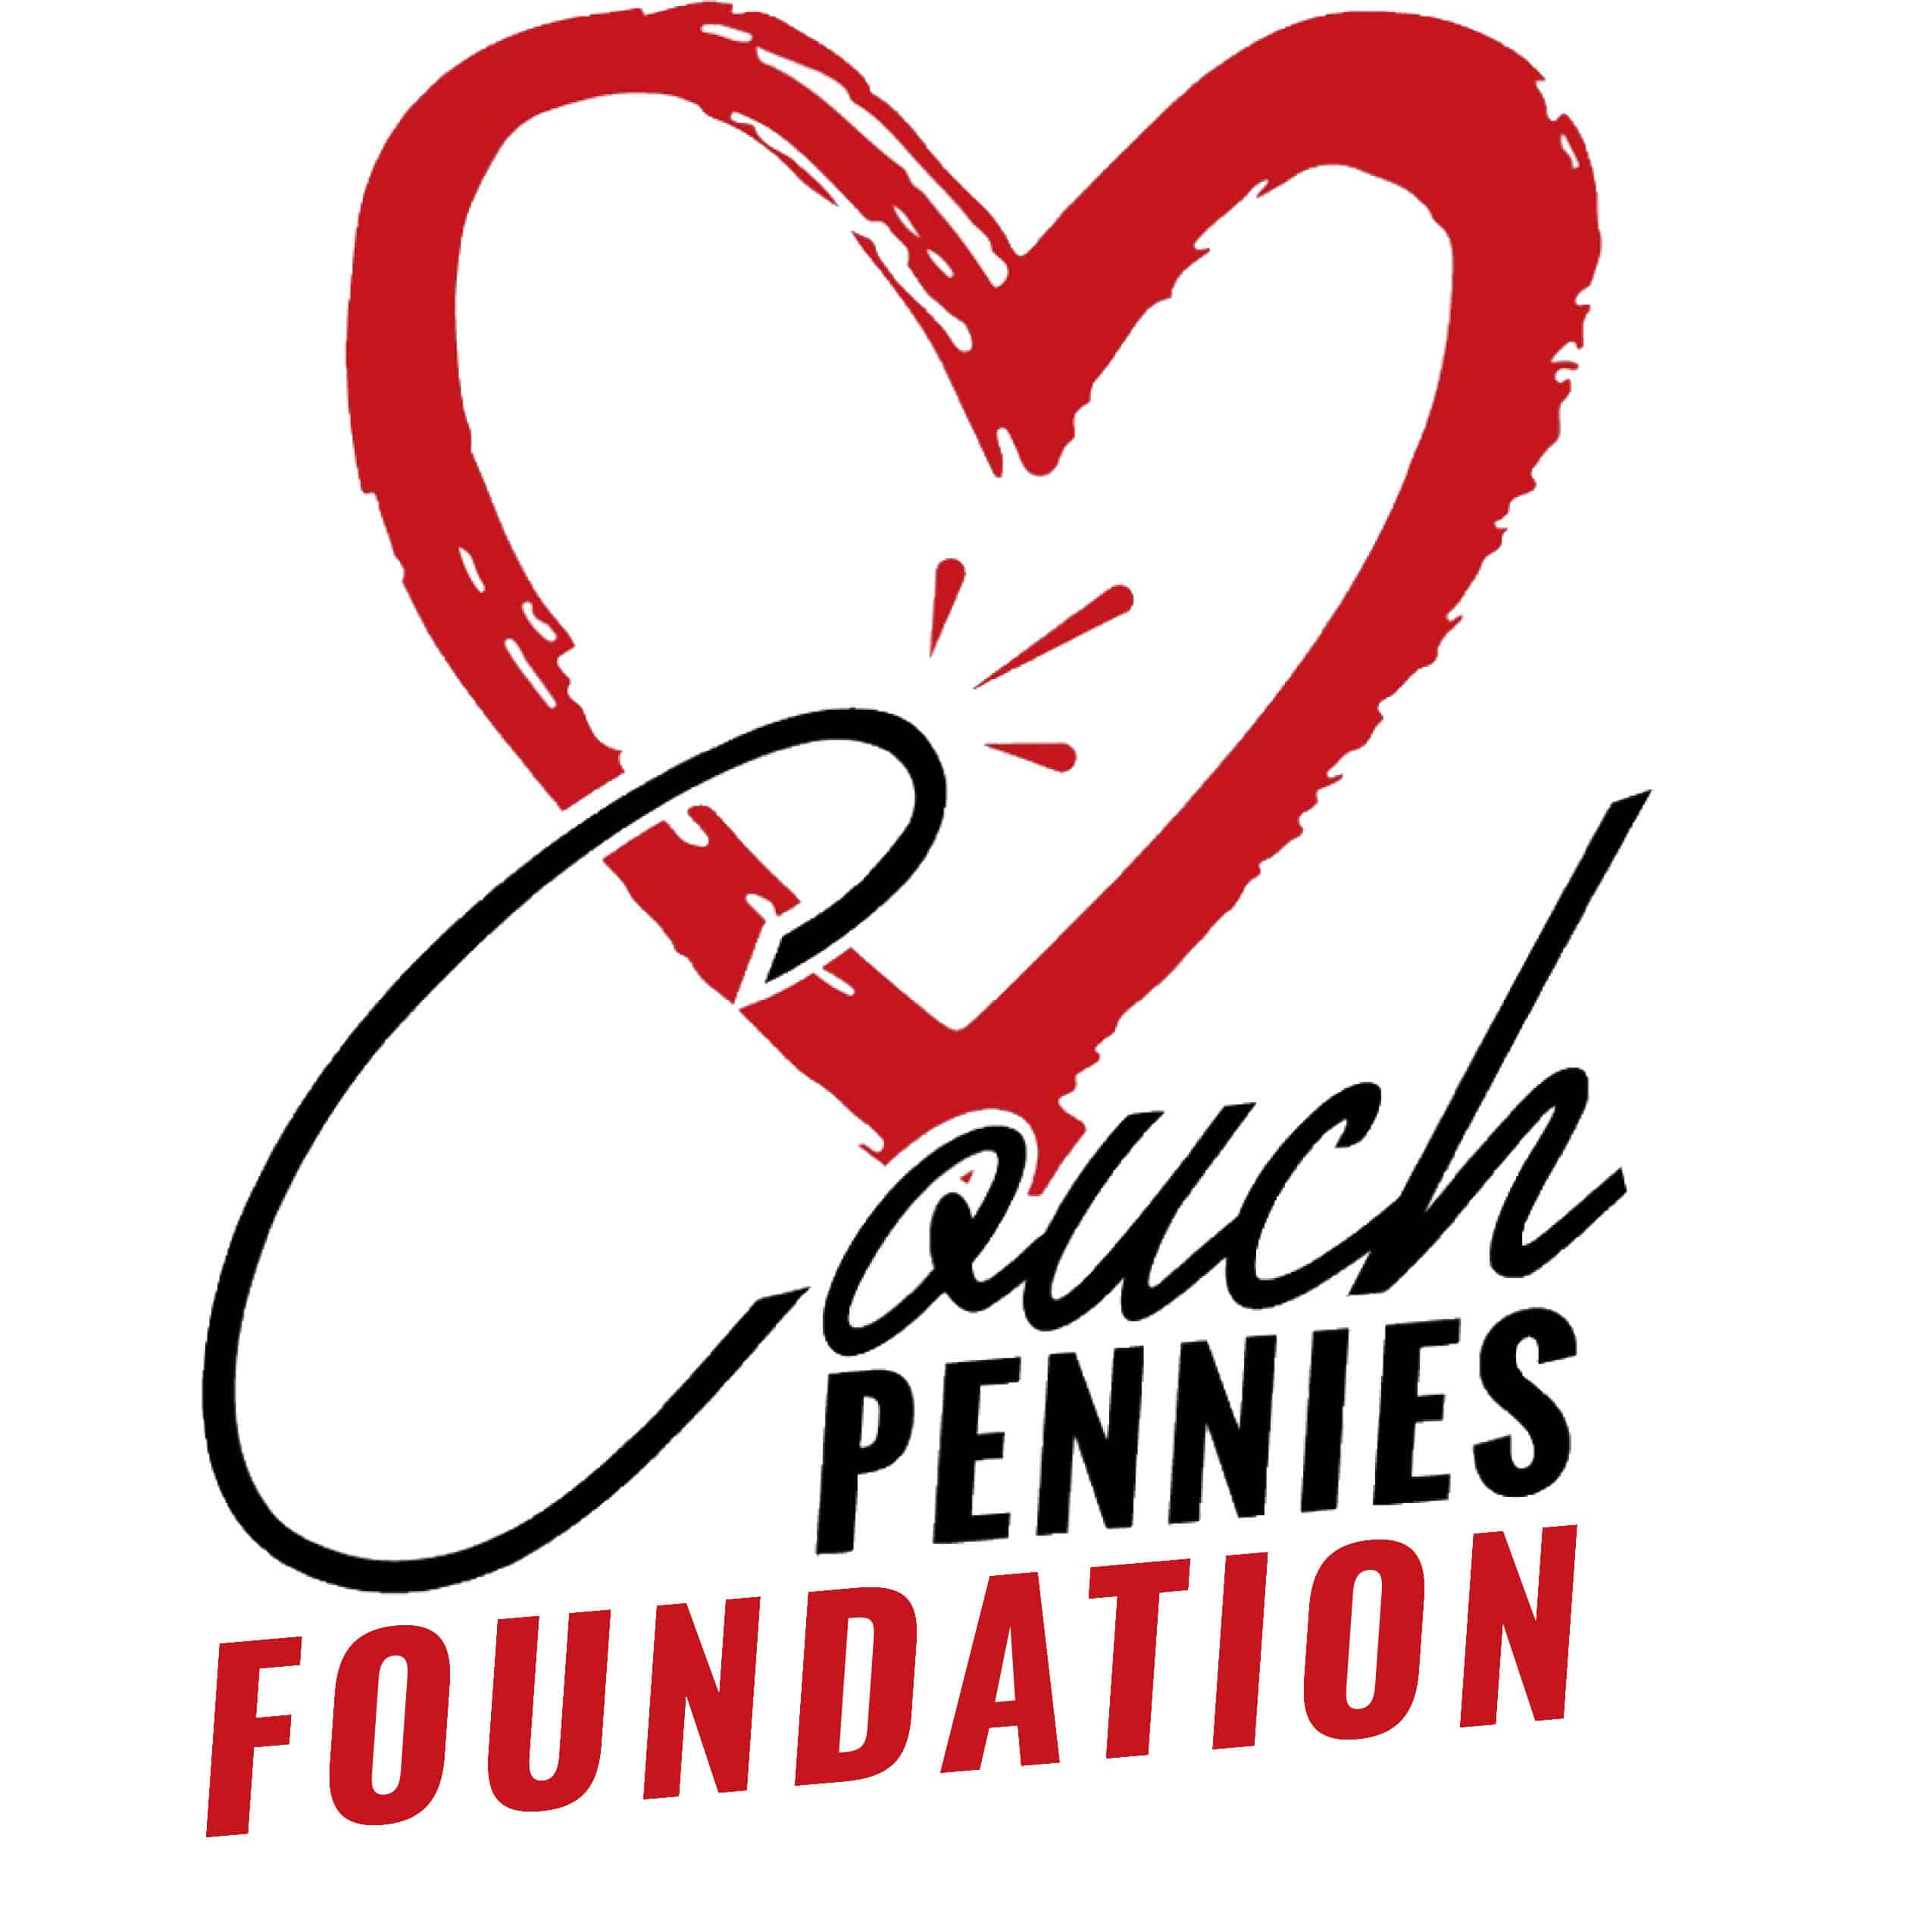 couch pennies foundation